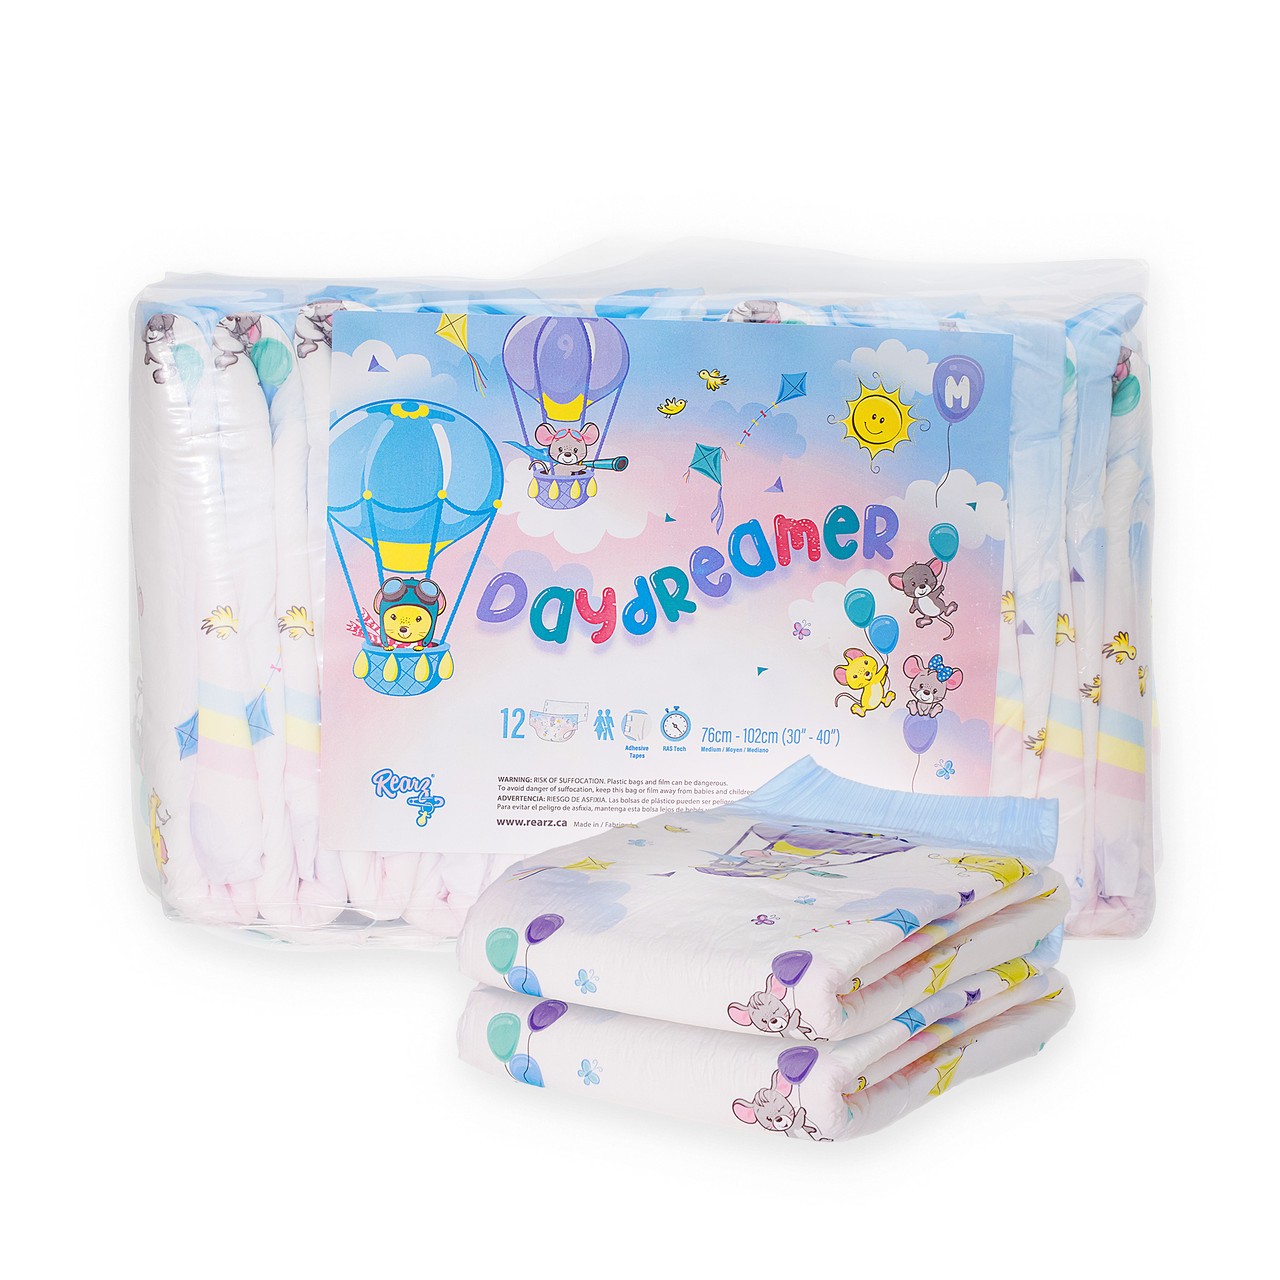 <p>It's new diaper day at Rearz and man these ones are cute! <a target="_blank" rel="nofollow" href="https://bit.ly/Rearzdreamlaunch">https://bit.ly/Rearzdreamlaunch</a></p>